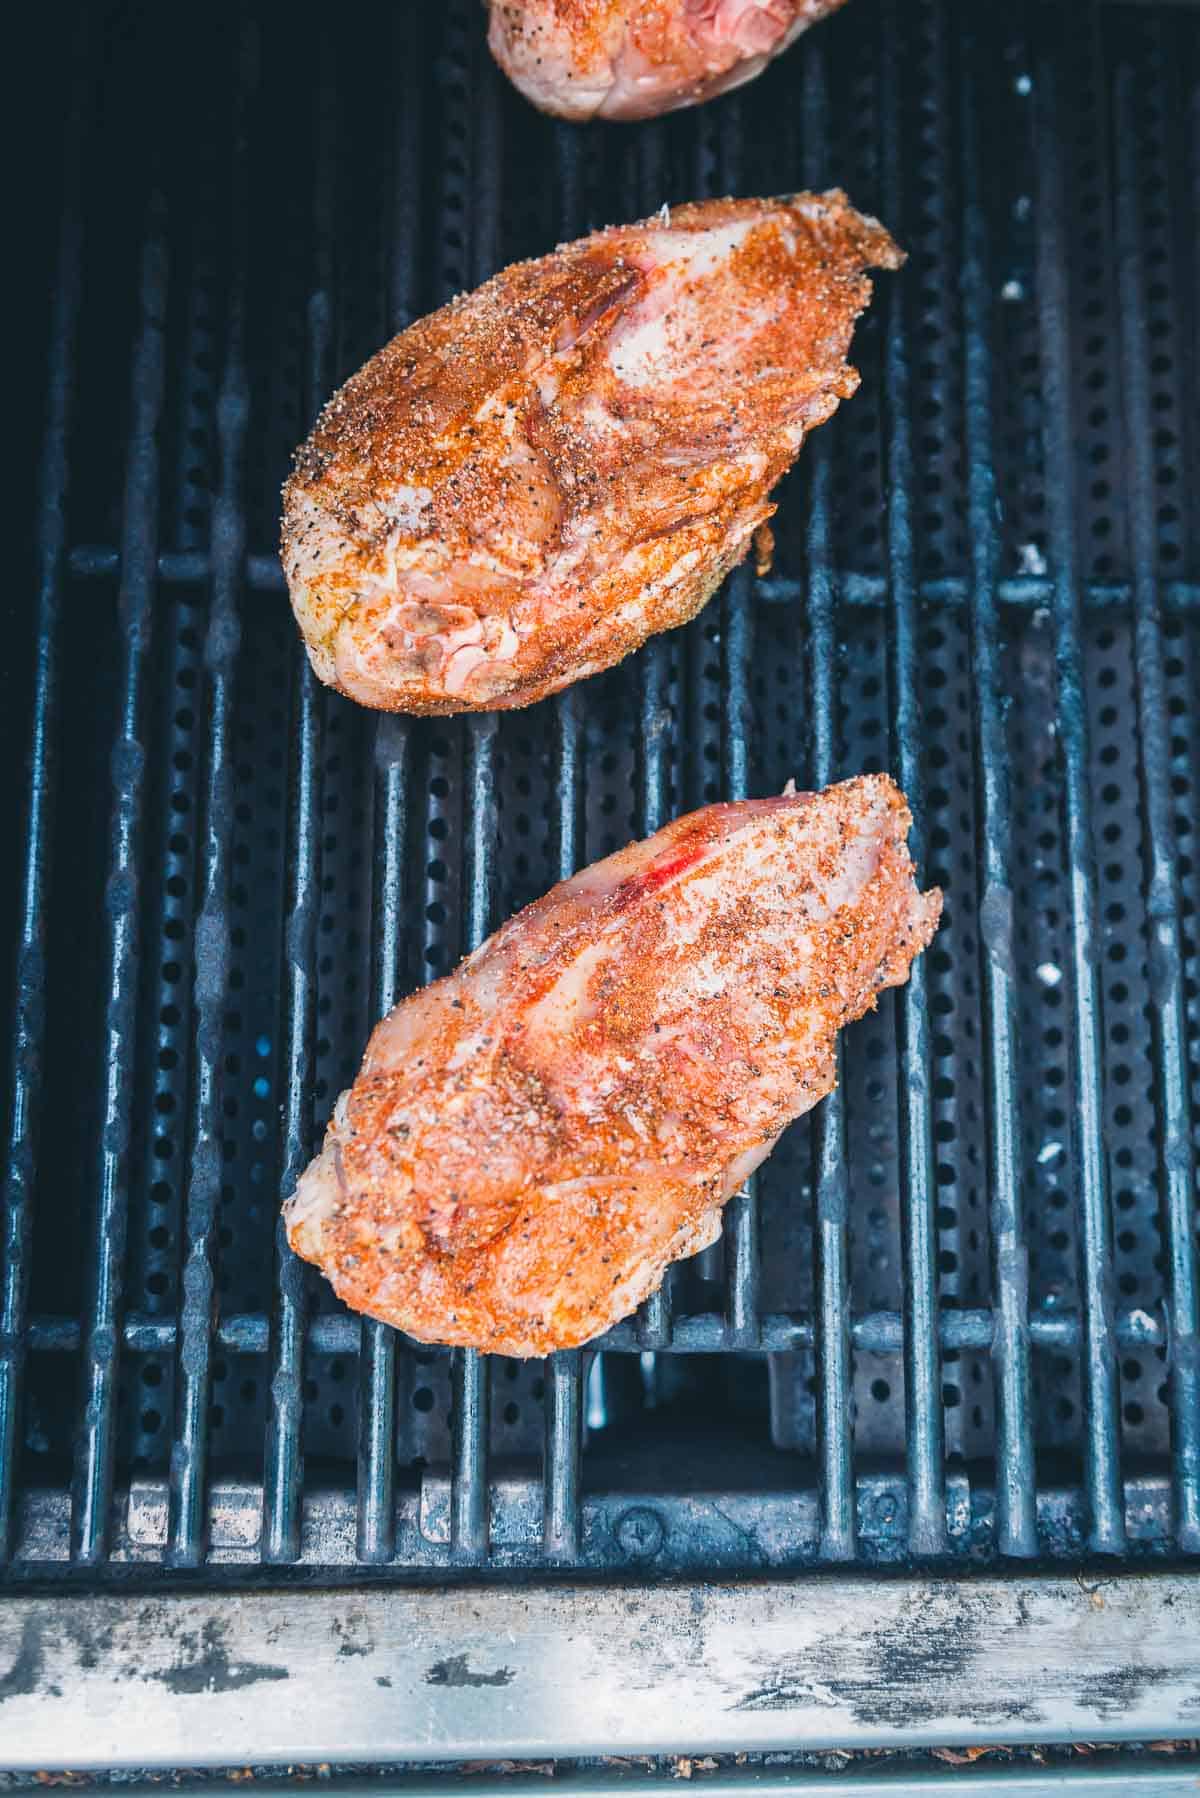 Chicken, skin side down on the grill.